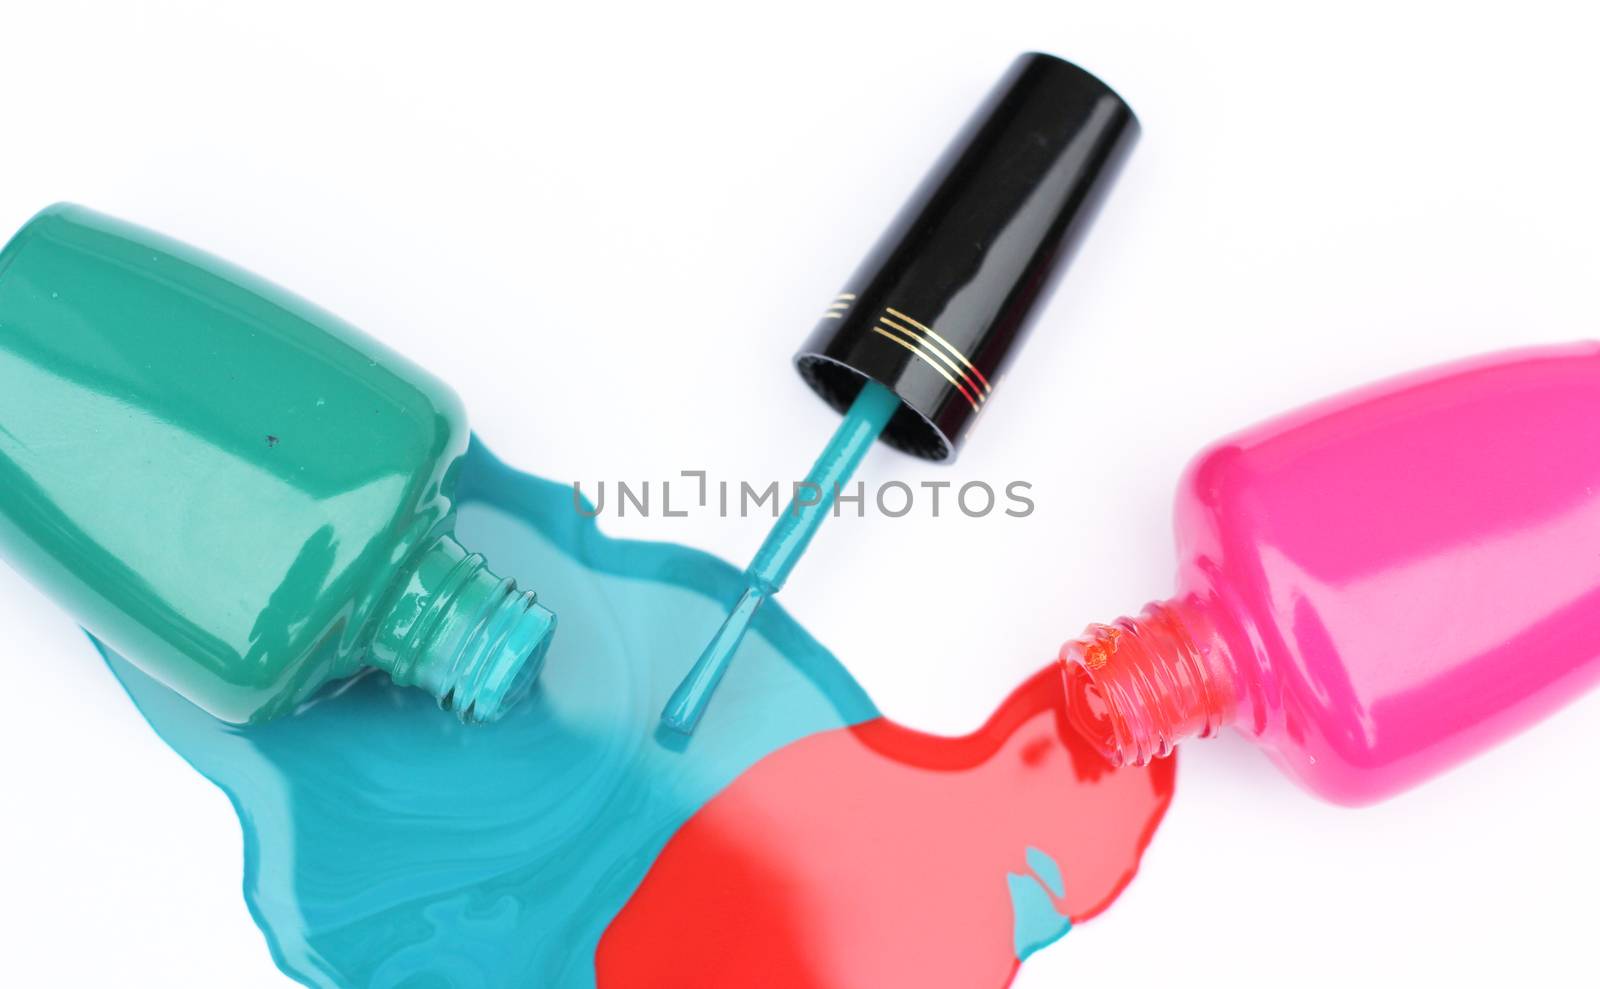 Spilled Nail Polish on White Background by Marti157900